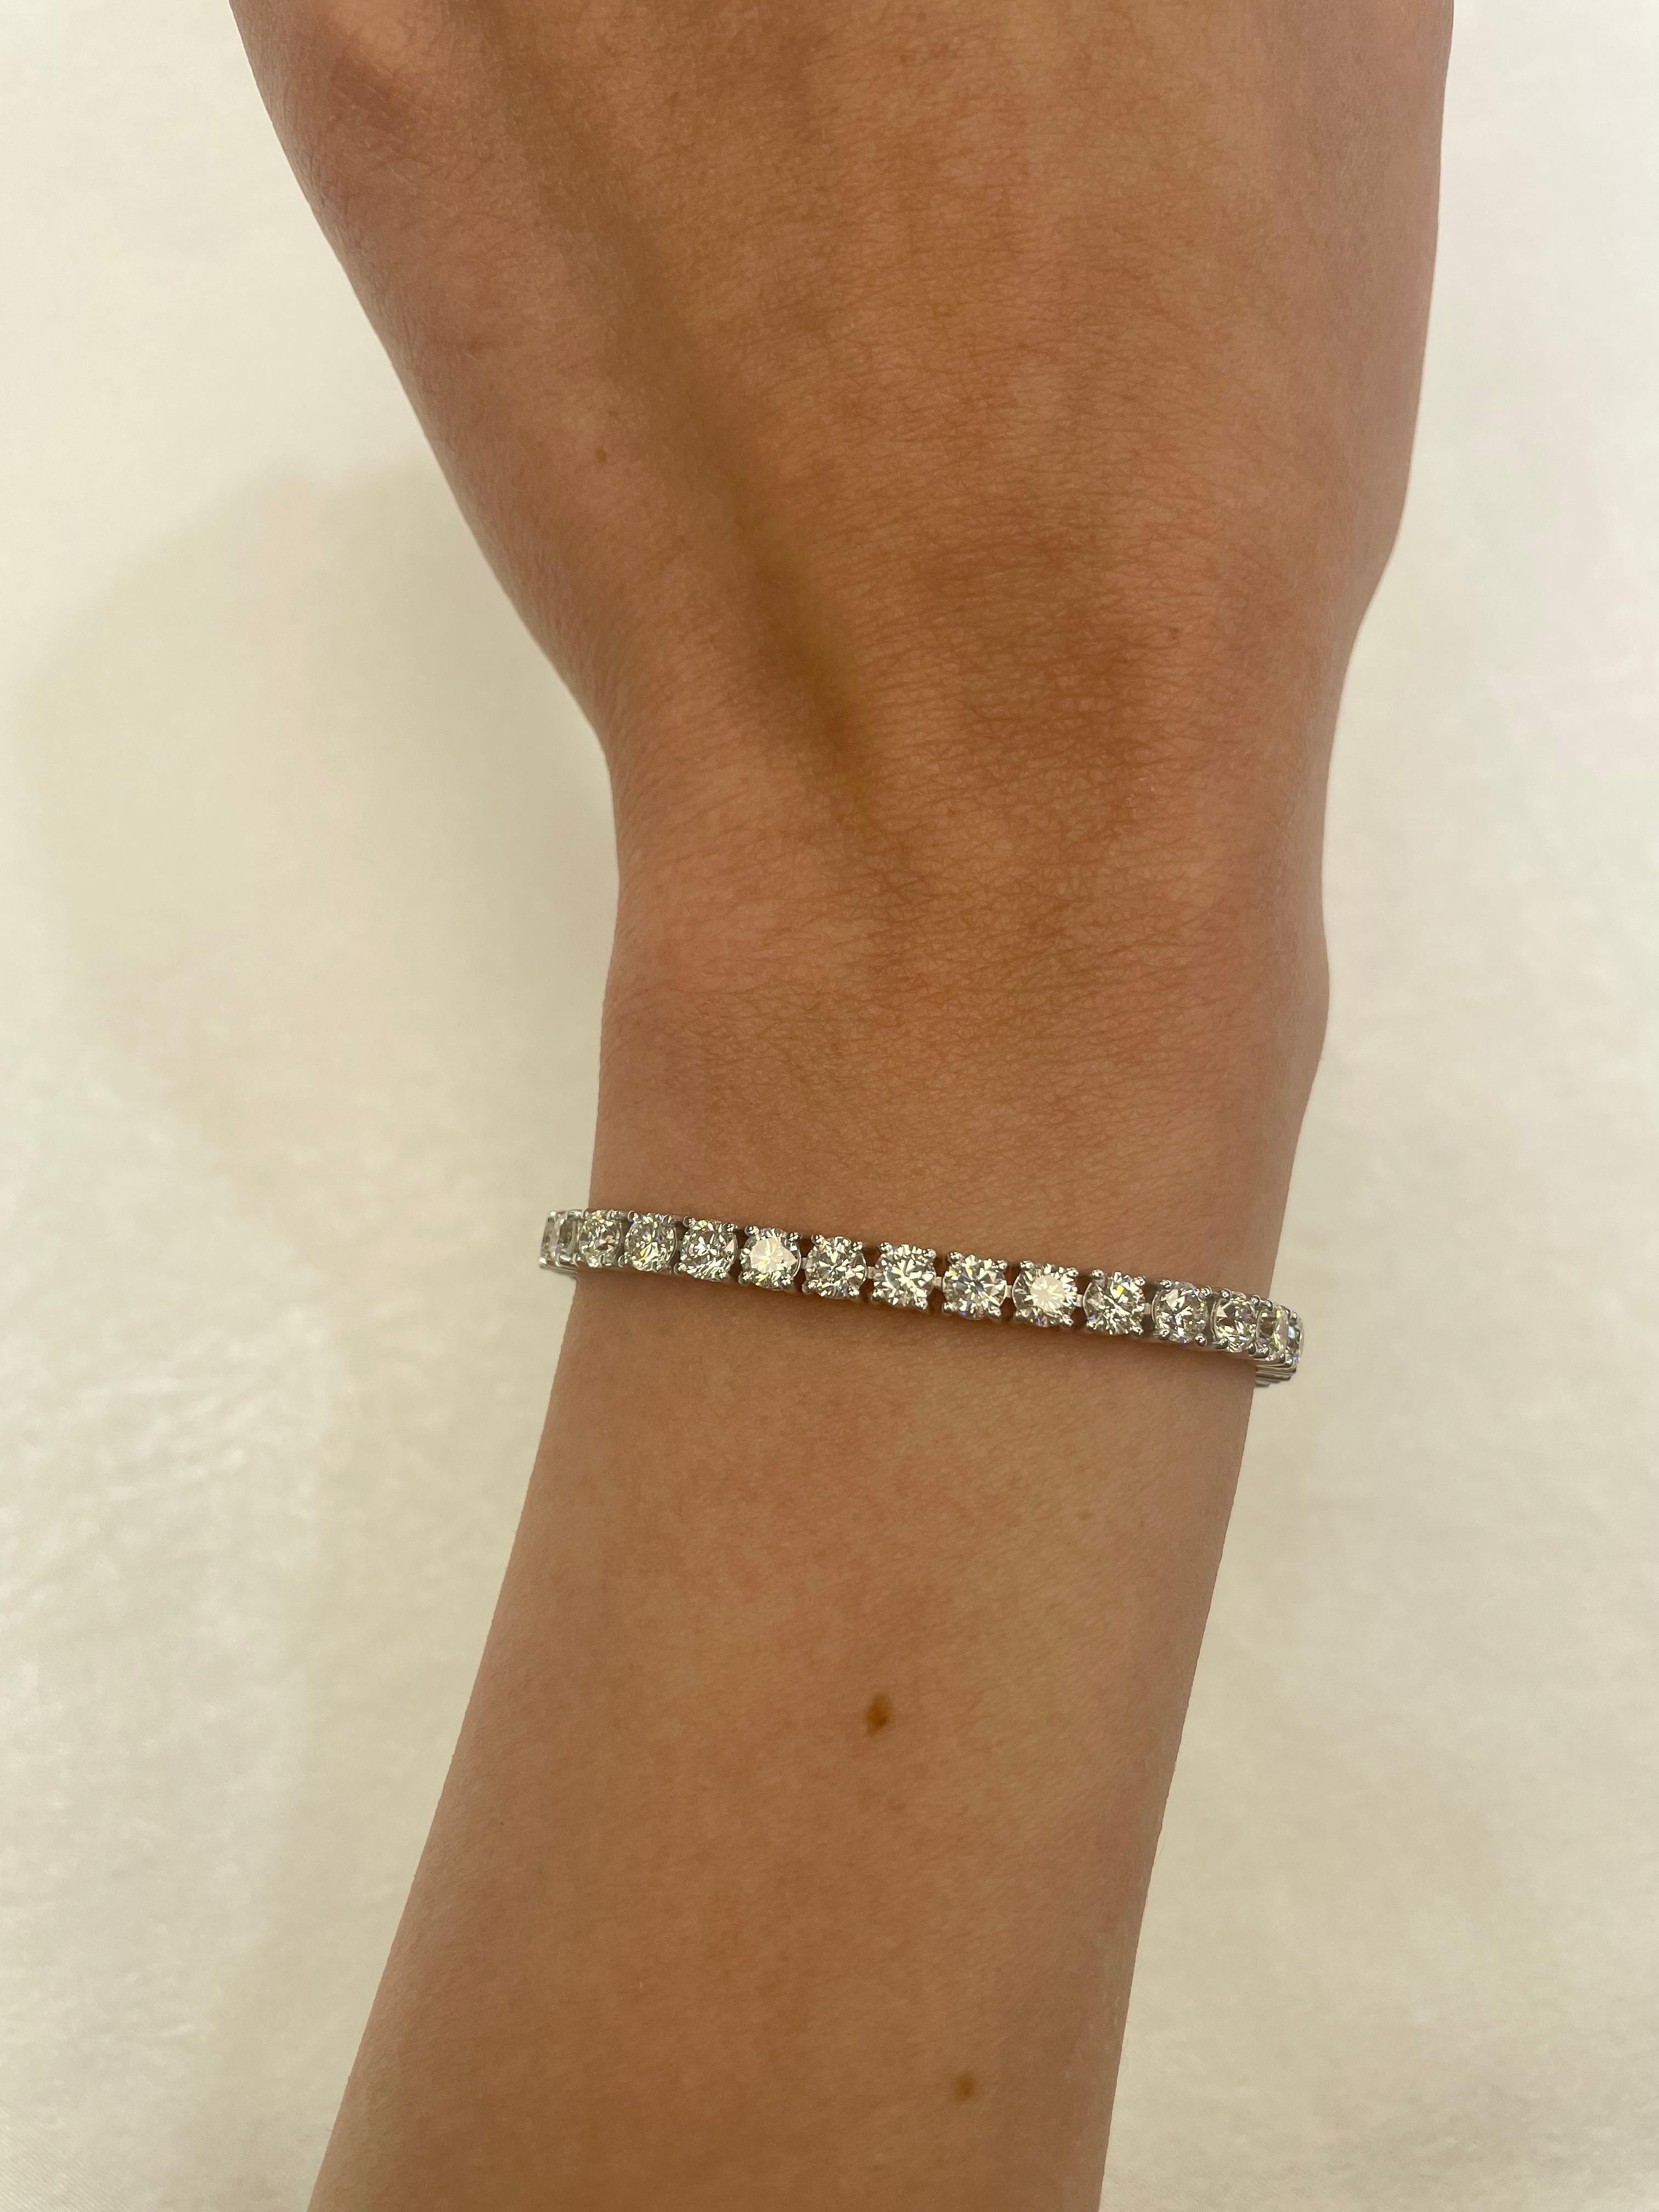 Exquisite and timeless diamonds tennis bracelet, by Alexander Beverly Hills.
42 round brilliant diamonds, 10.19 carats total. Approximately G/H color and VS clarity. Four prong set in 18k white gold, 12.16 grams, 7 inches. 
Accommodated with an up